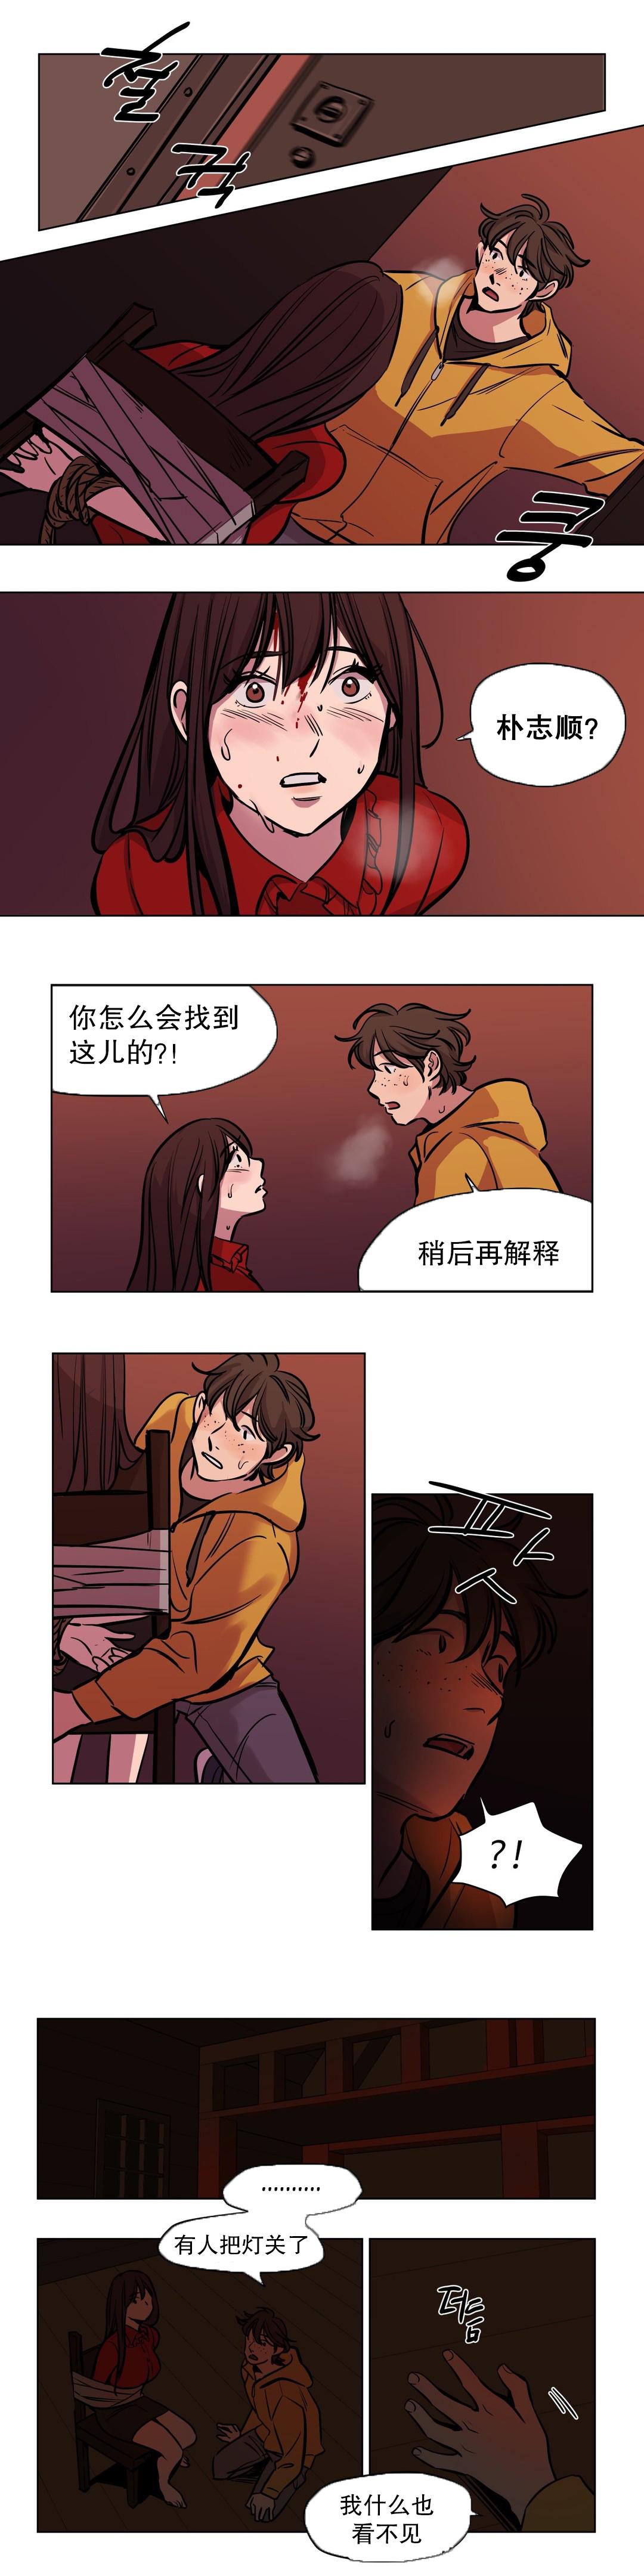 [Ramjak] 赎罪营(Atonement Camp) Ch.50-52 (Chinese) 20